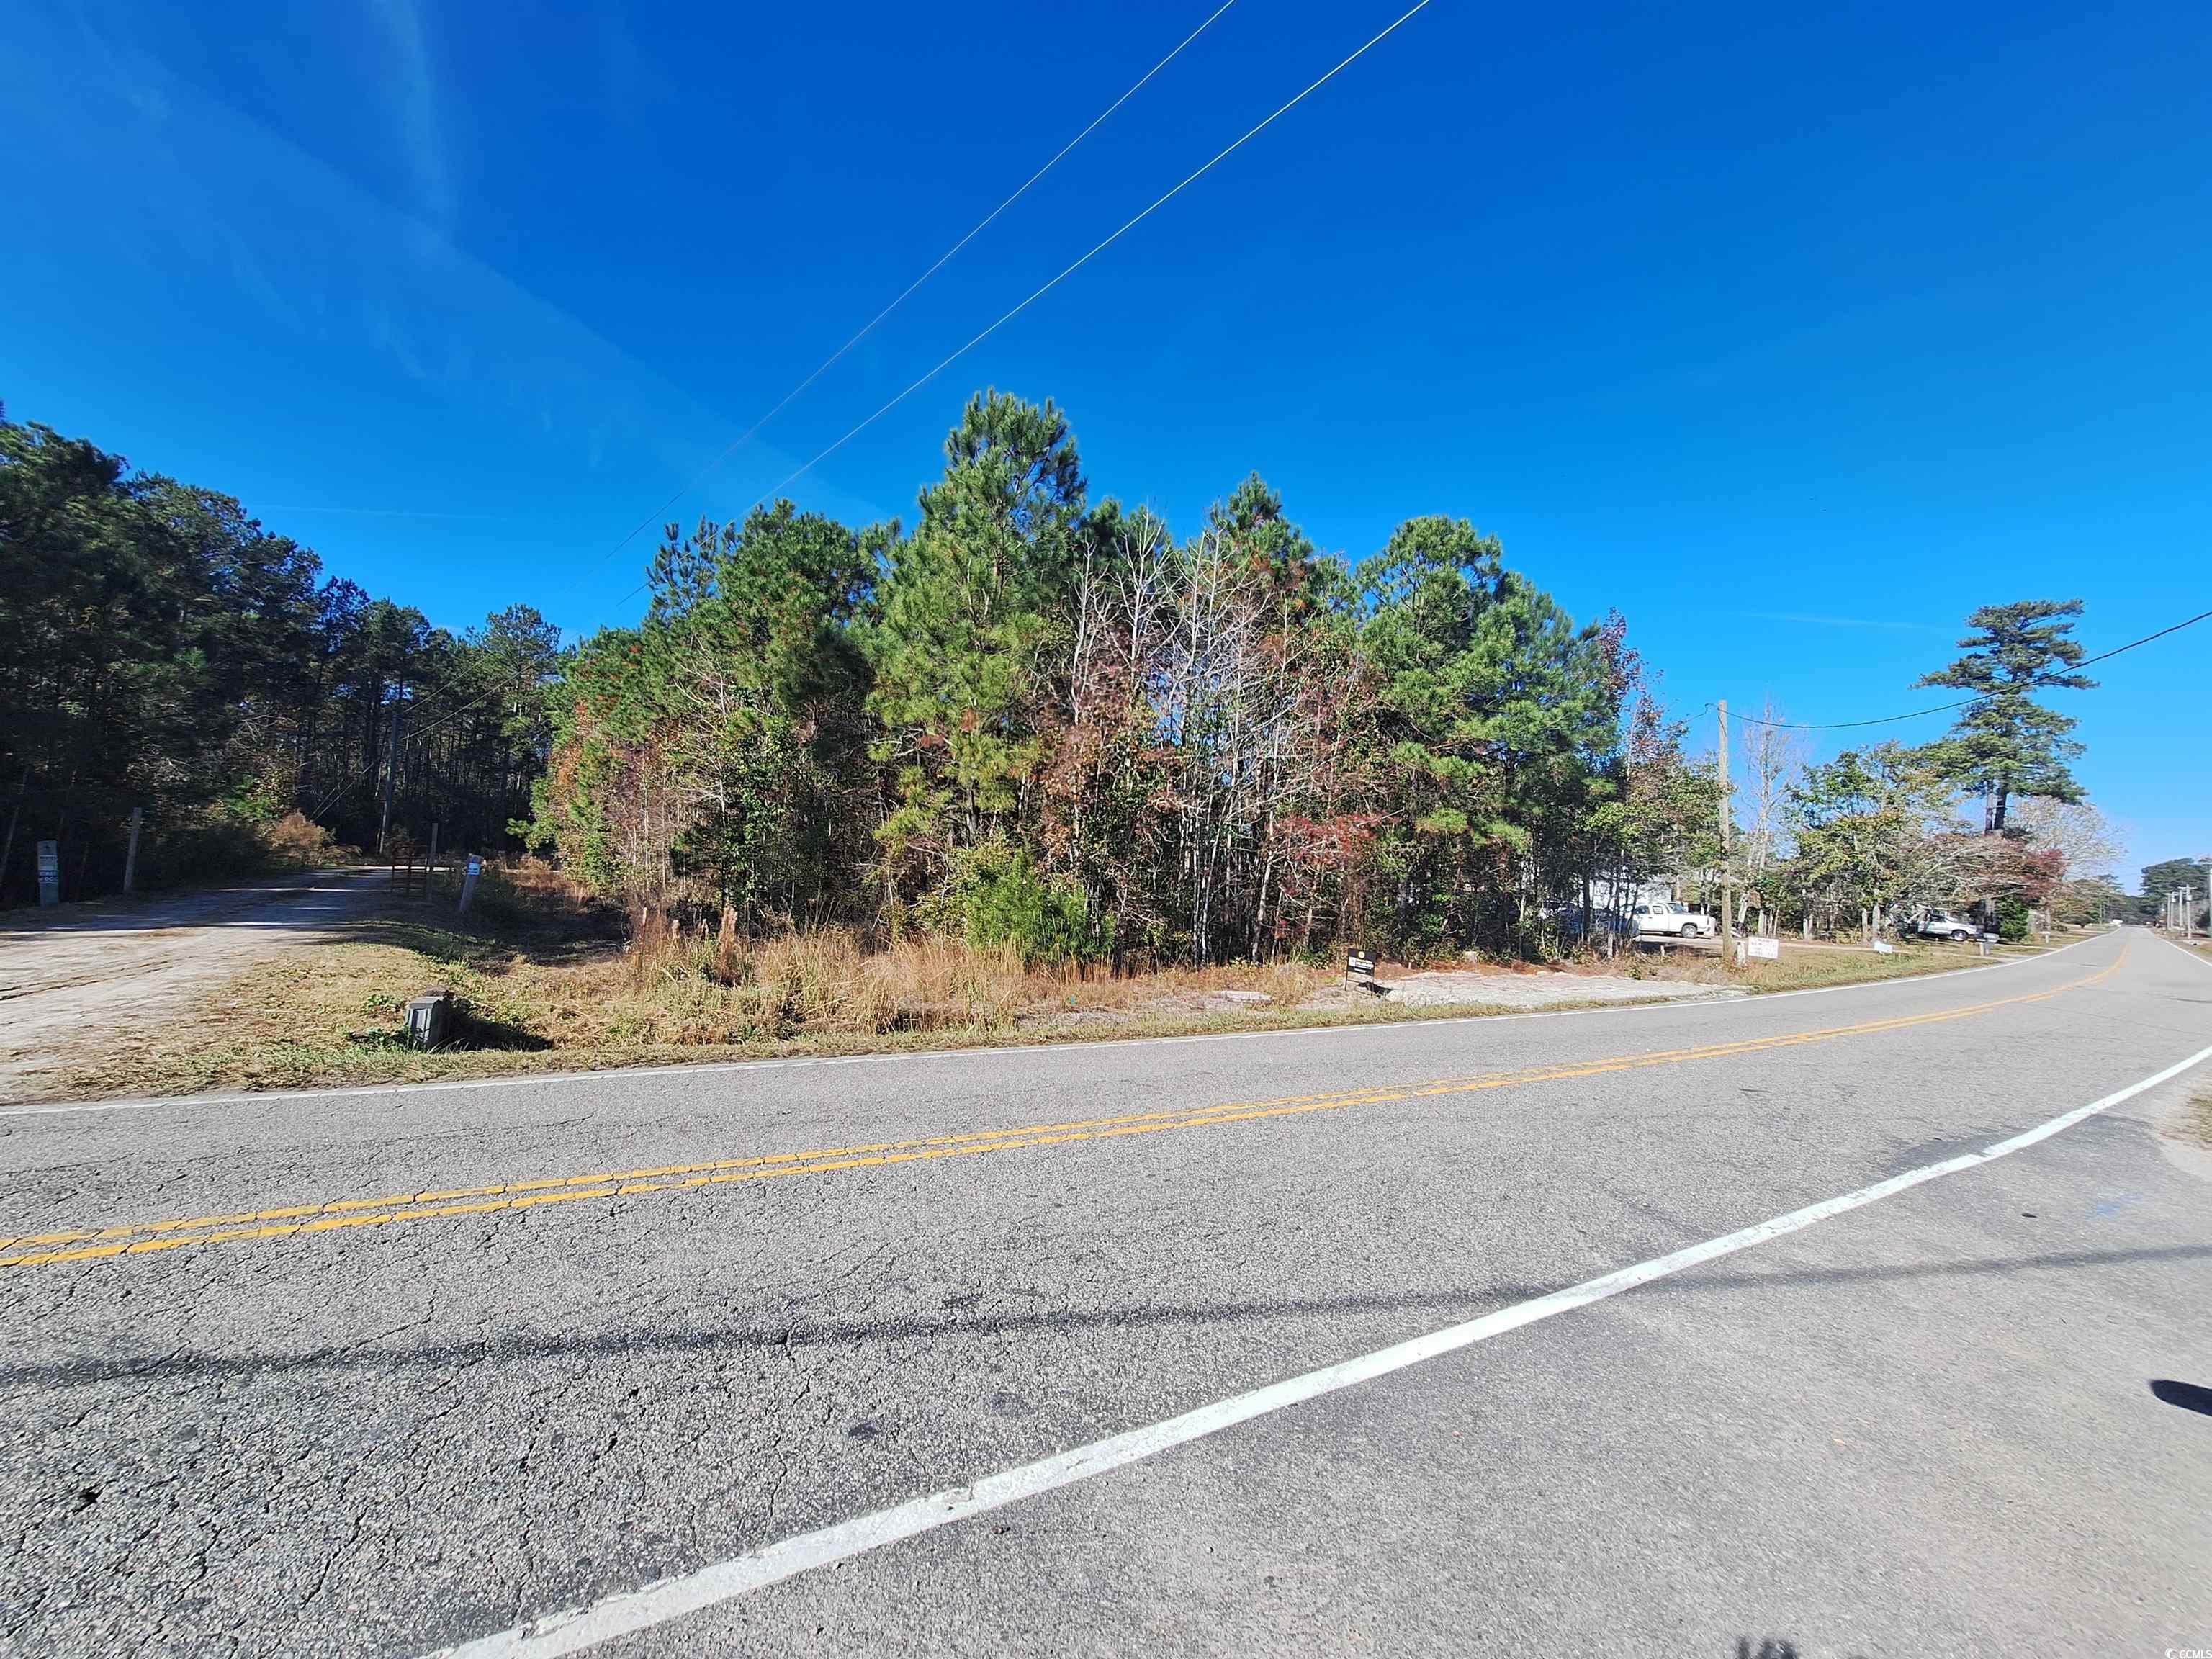 100' road frontage by 150' deep wooded lot new driveway just built mobile homes/ manufactured allowed zoned cfa city water/sewer seller will consider to have lot cleared-grinded down and keep buffered